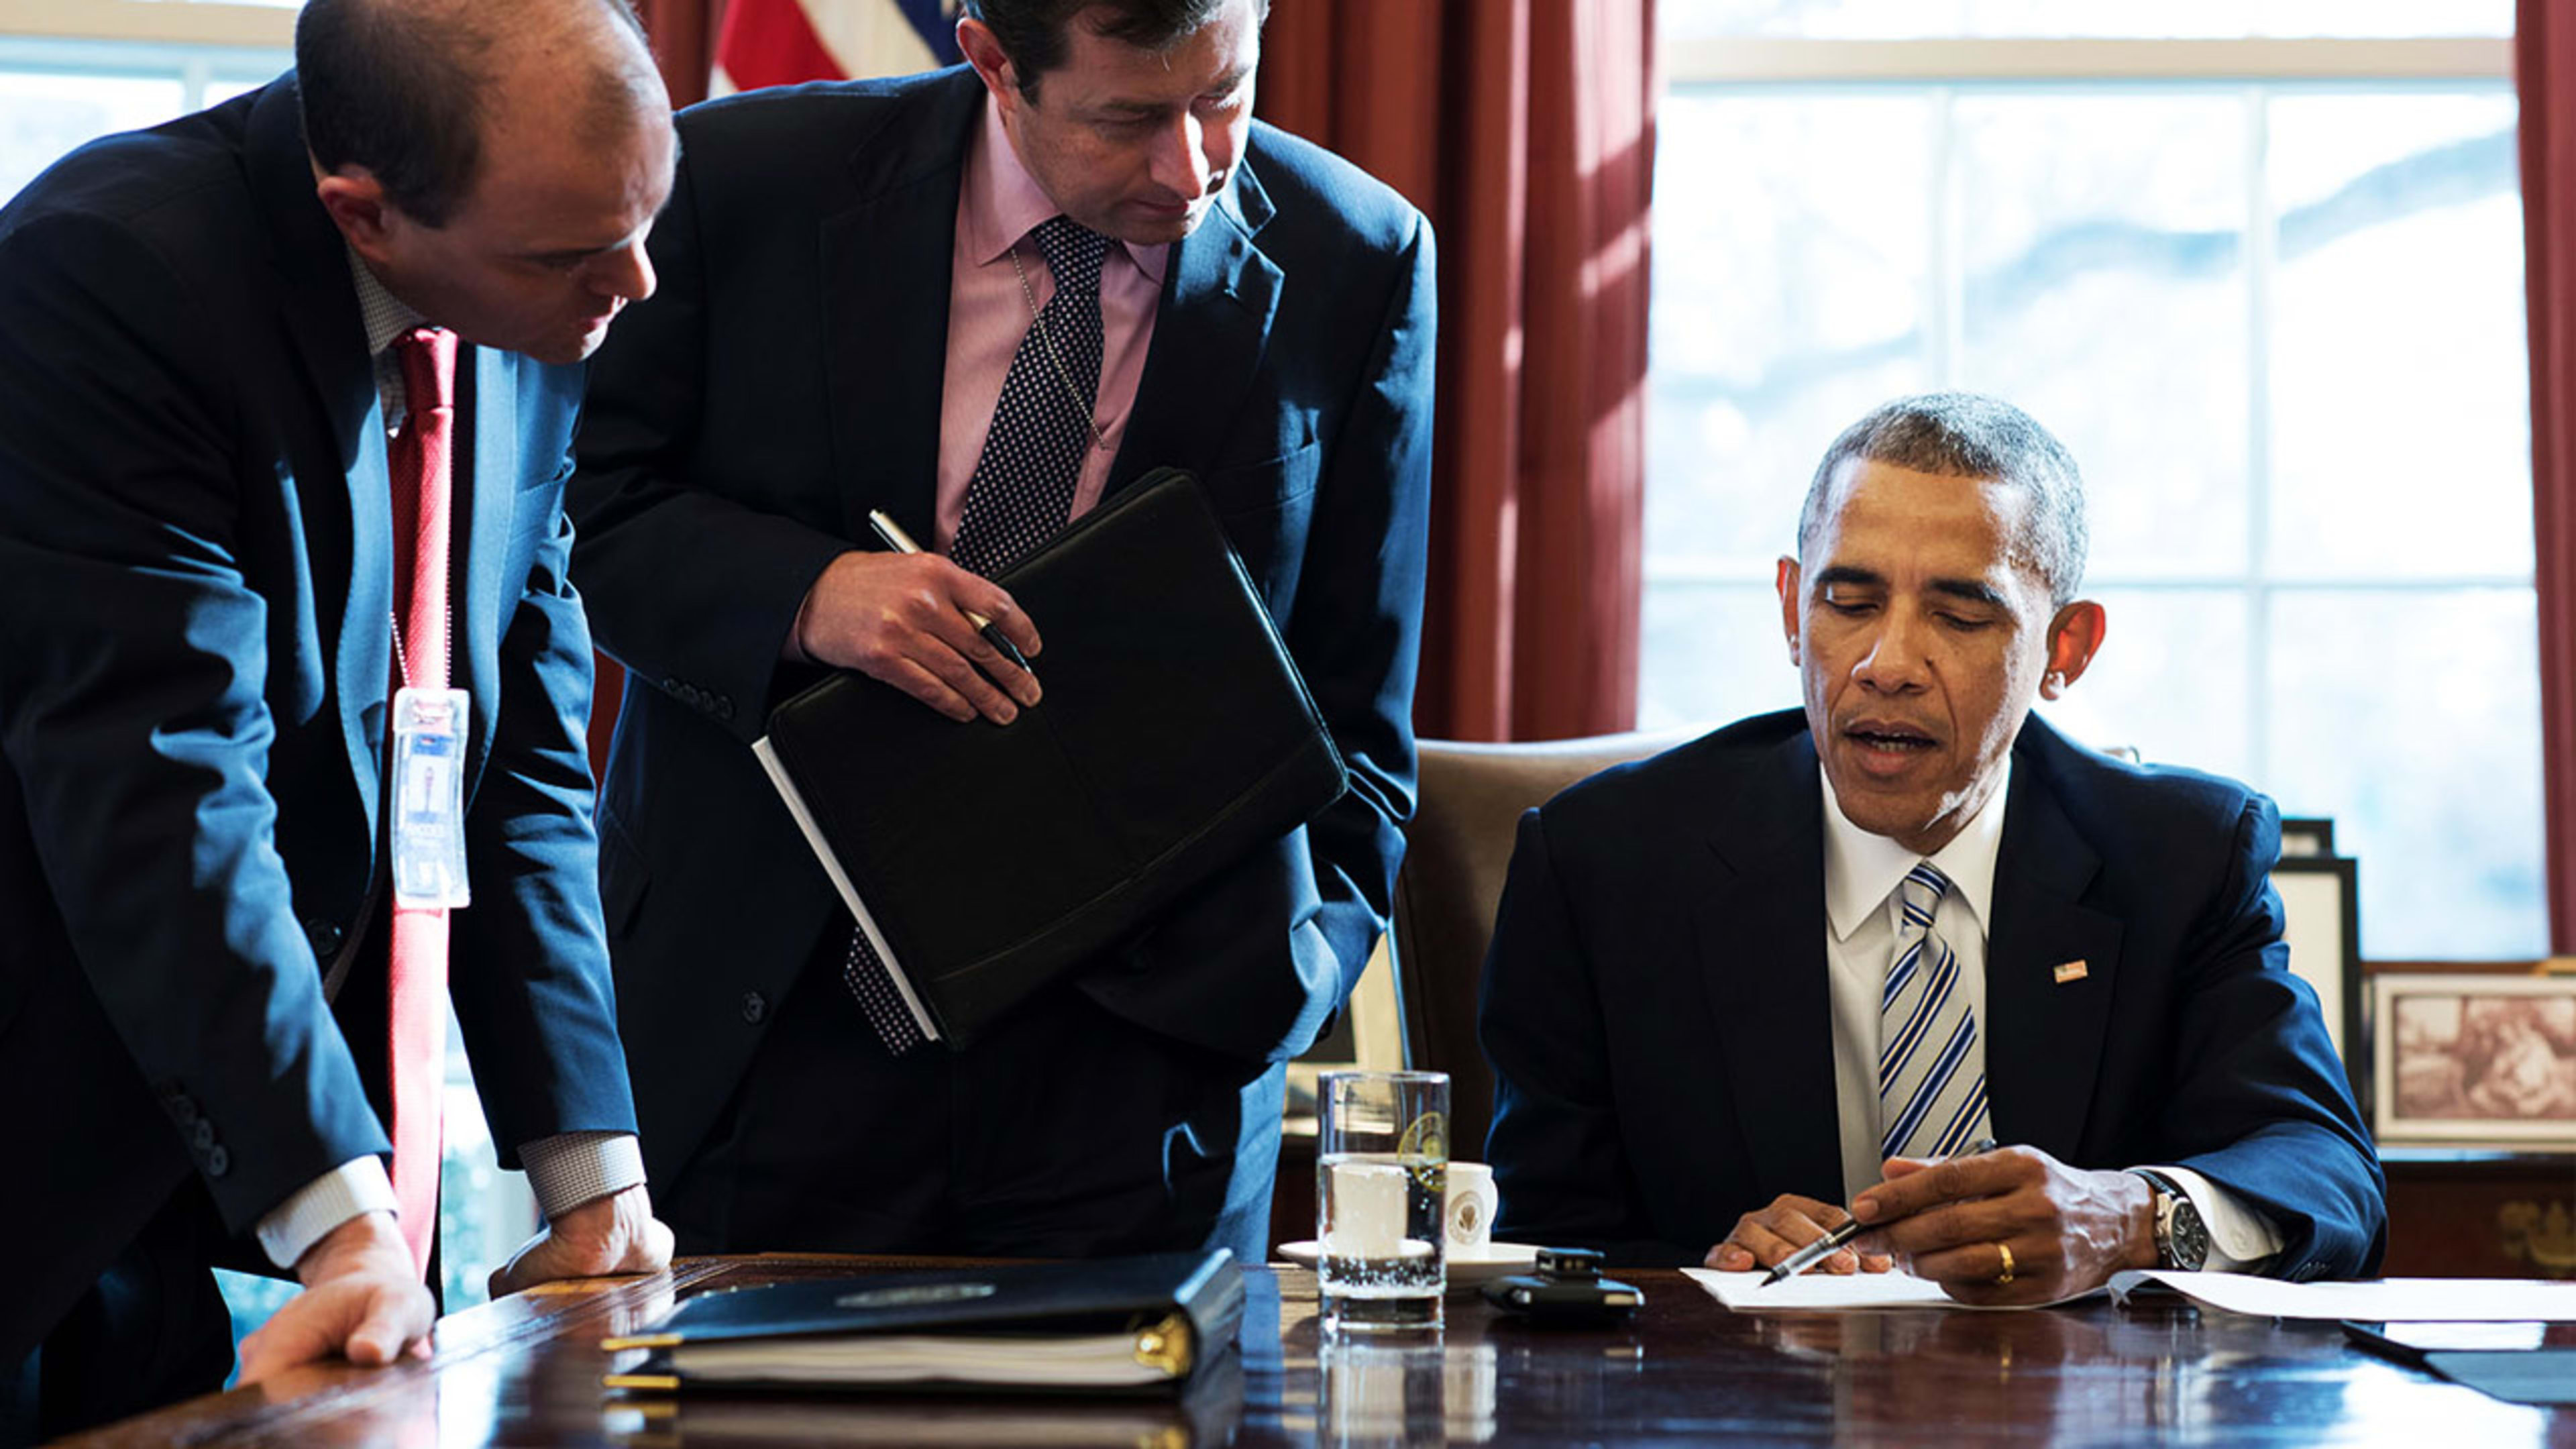 White House Forms “Dream Team” To Combat ISIS On Social Media